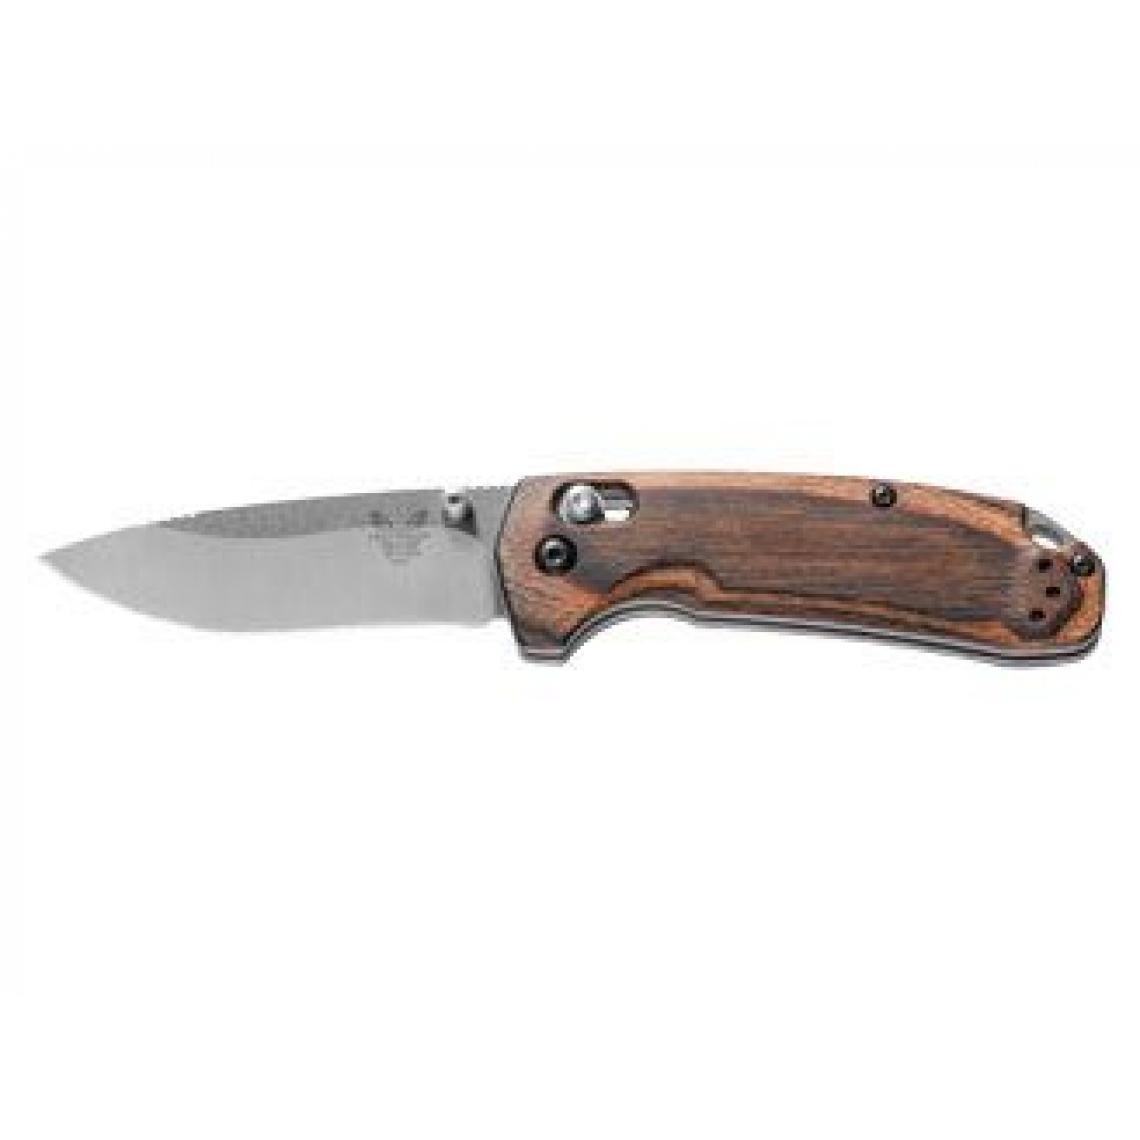 Divers Marques - Benchmade NORTH FORK FOLDING 15031-2 WOOD - Outils de coupe